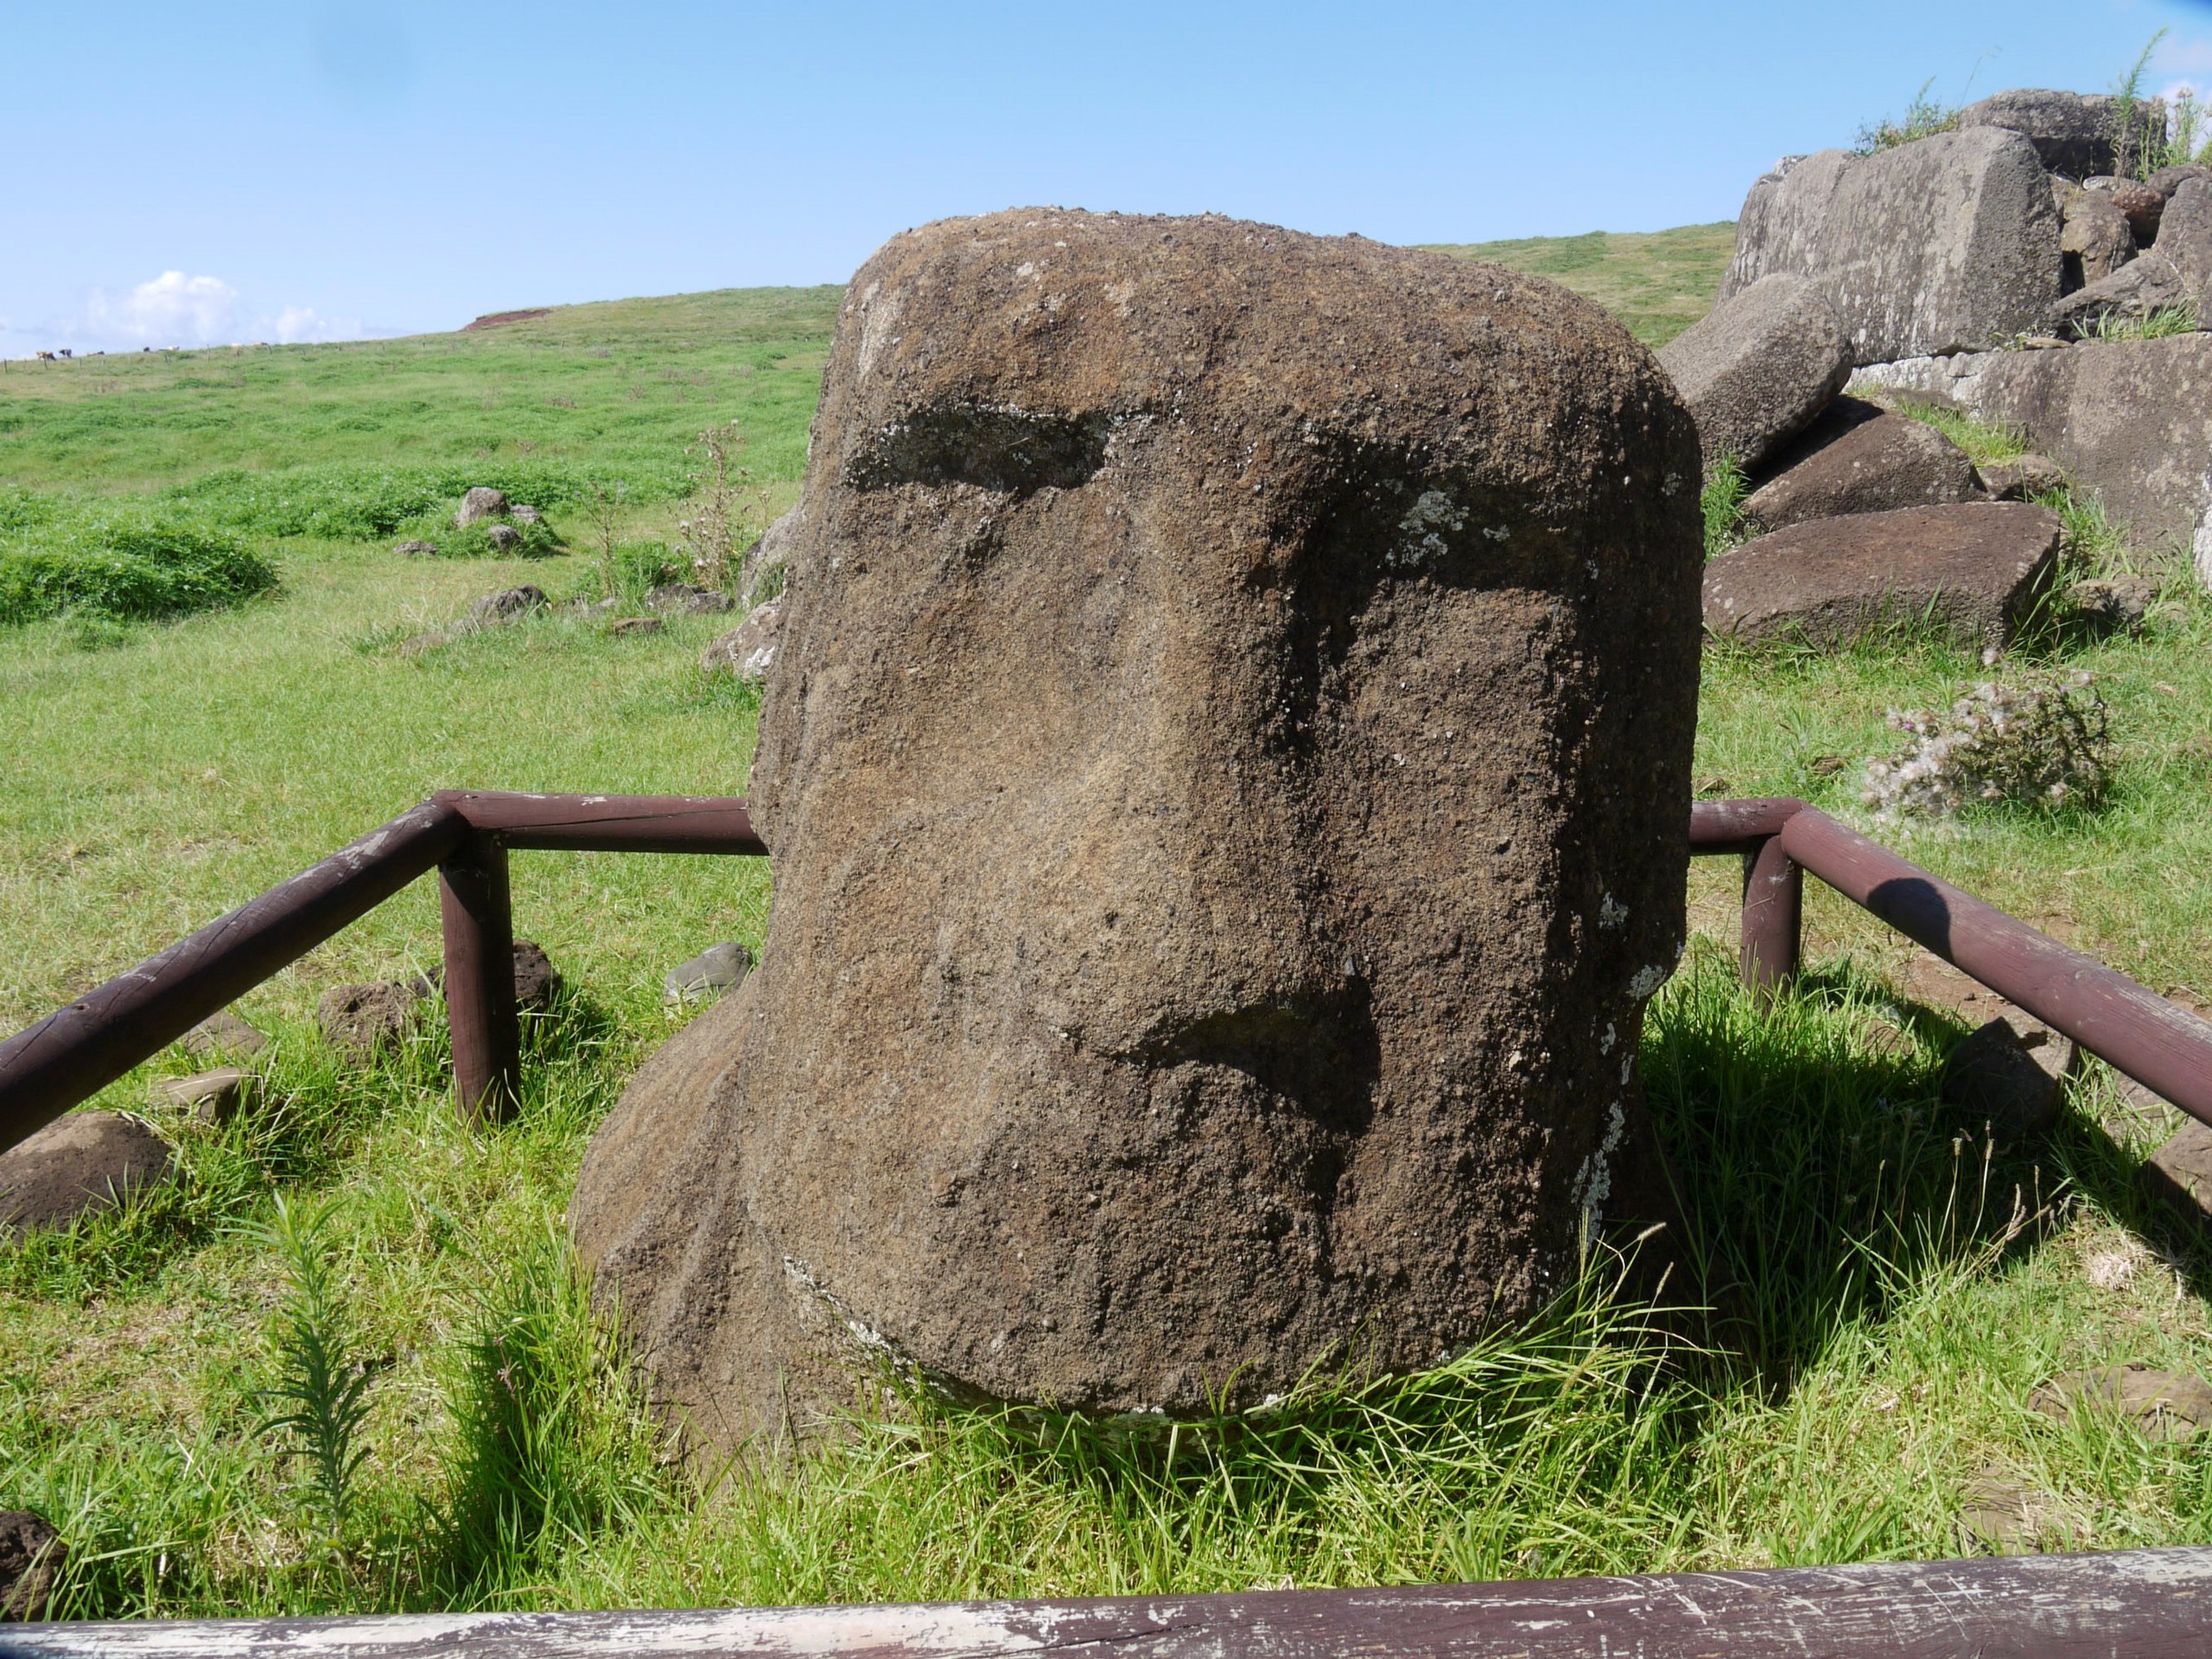 A moai with a large head, with distinctive eyes and lips, with the body sinking into the grassy ground. There is a fence around the moai to block people off. 